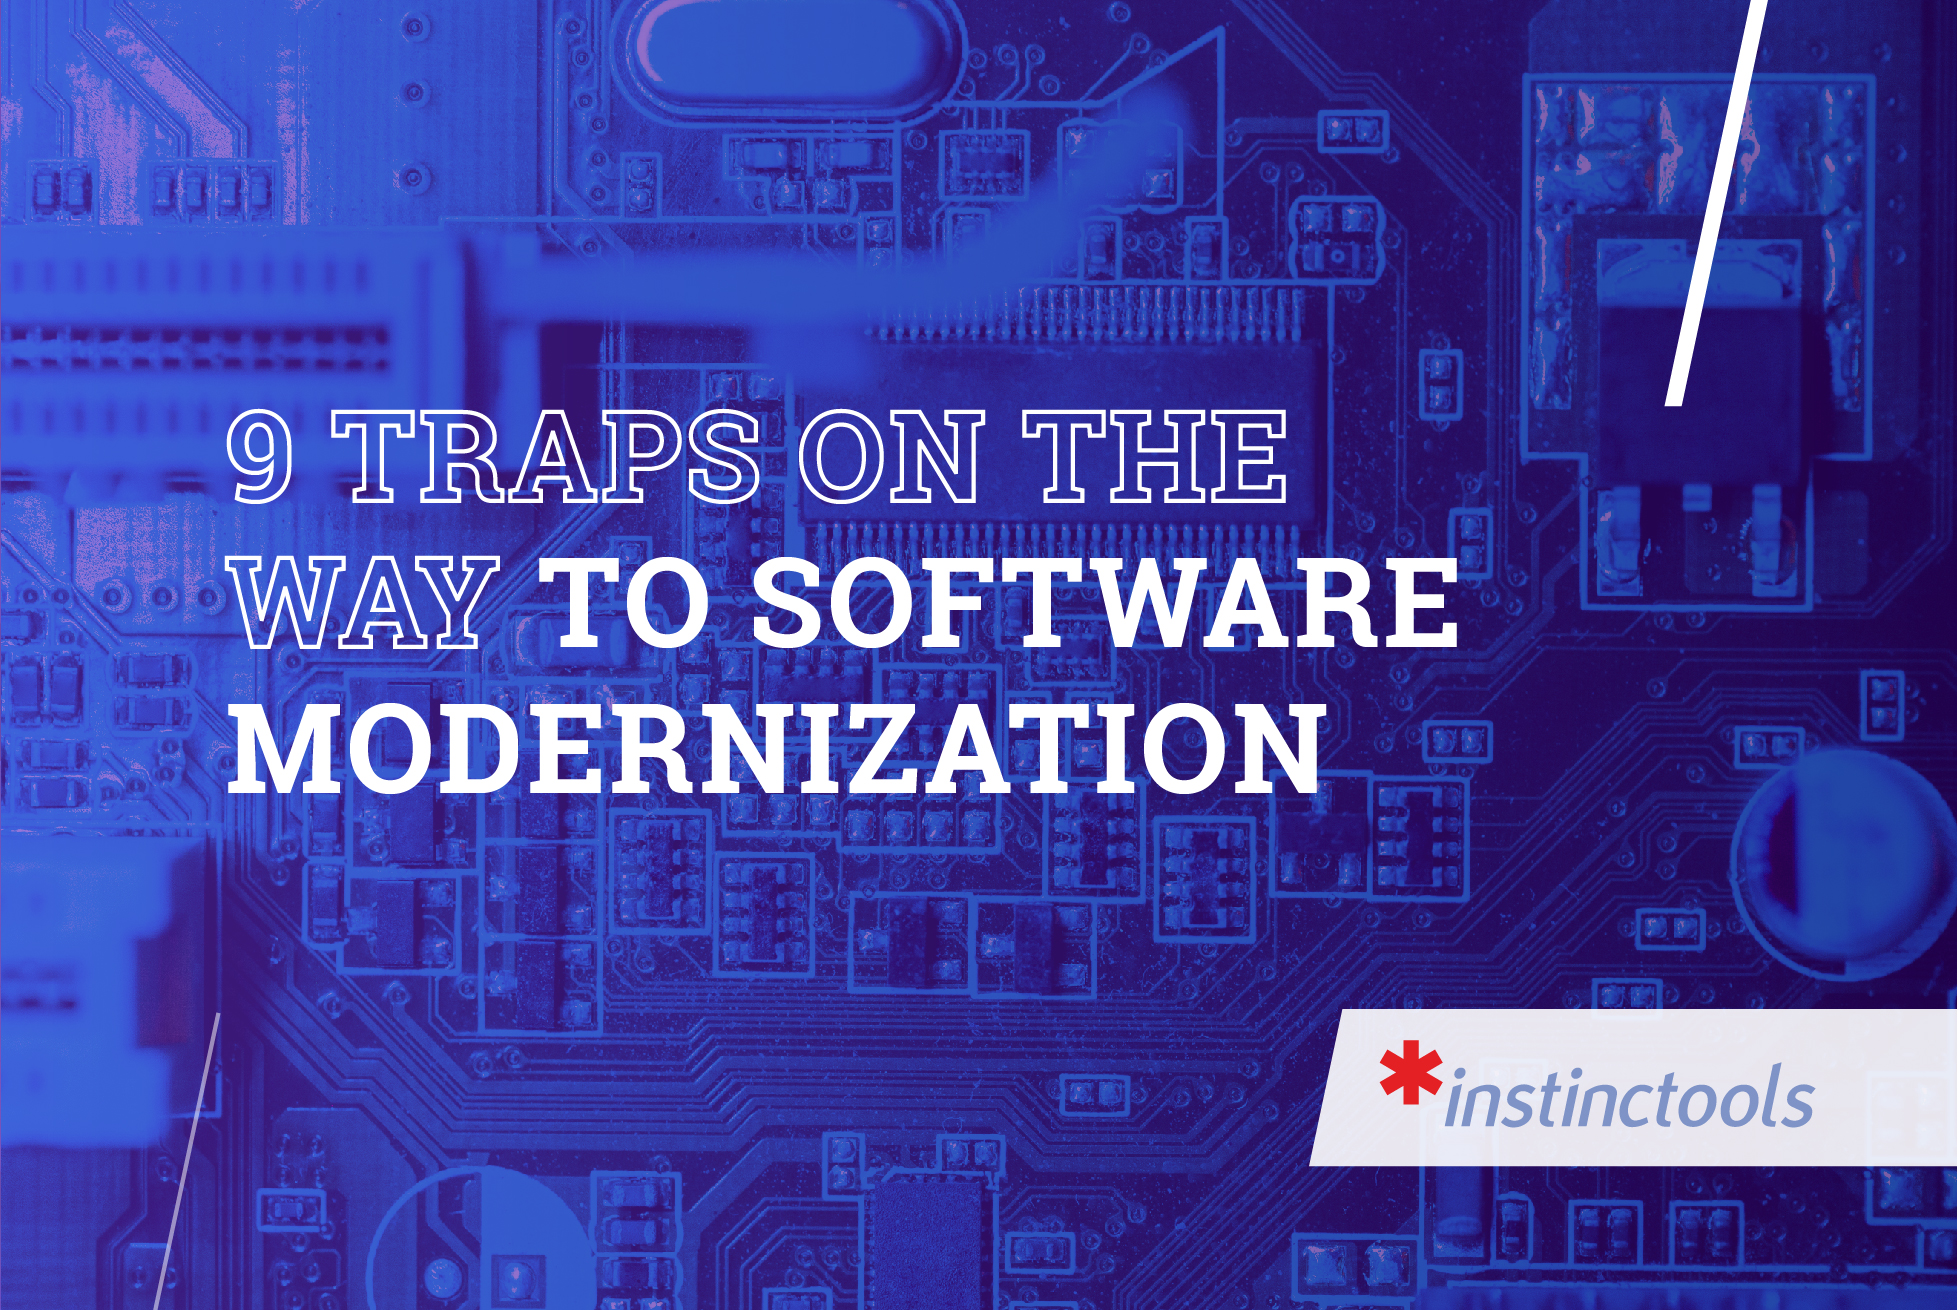 9 traps on the way to software modernization